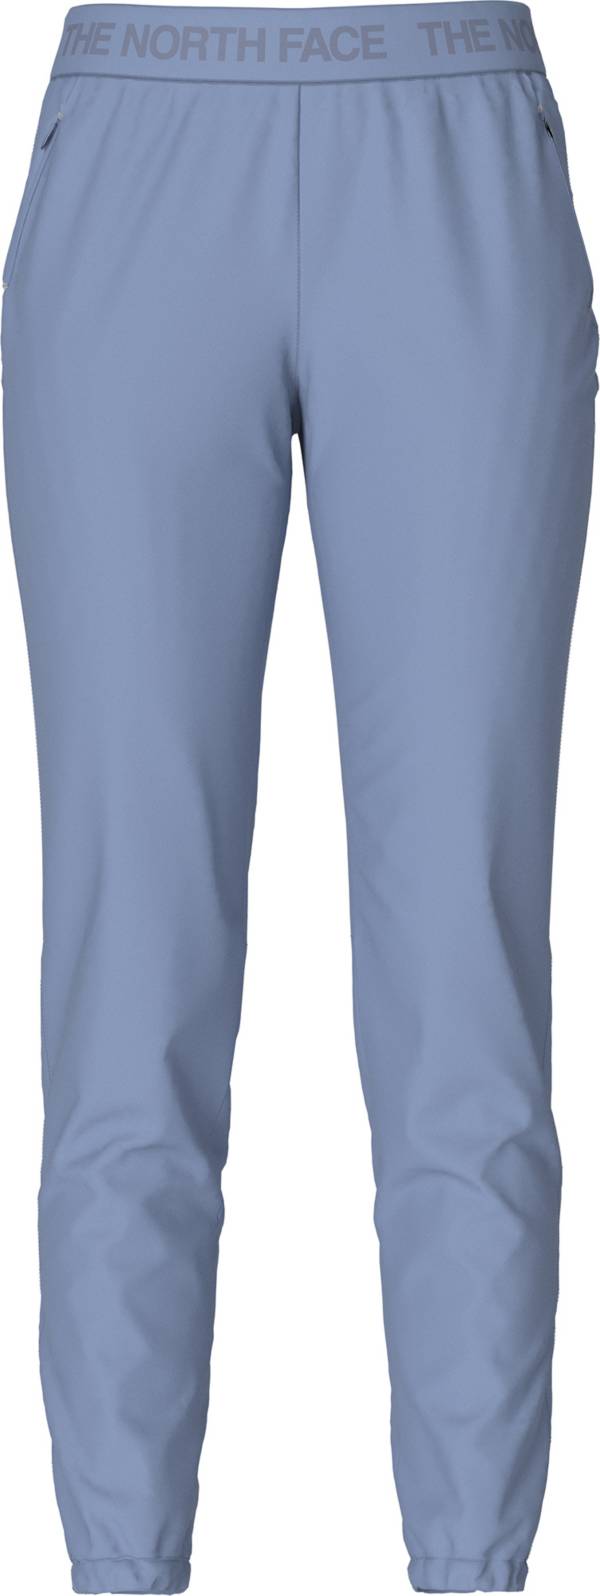 The North Face Women's Wander Joggers product image